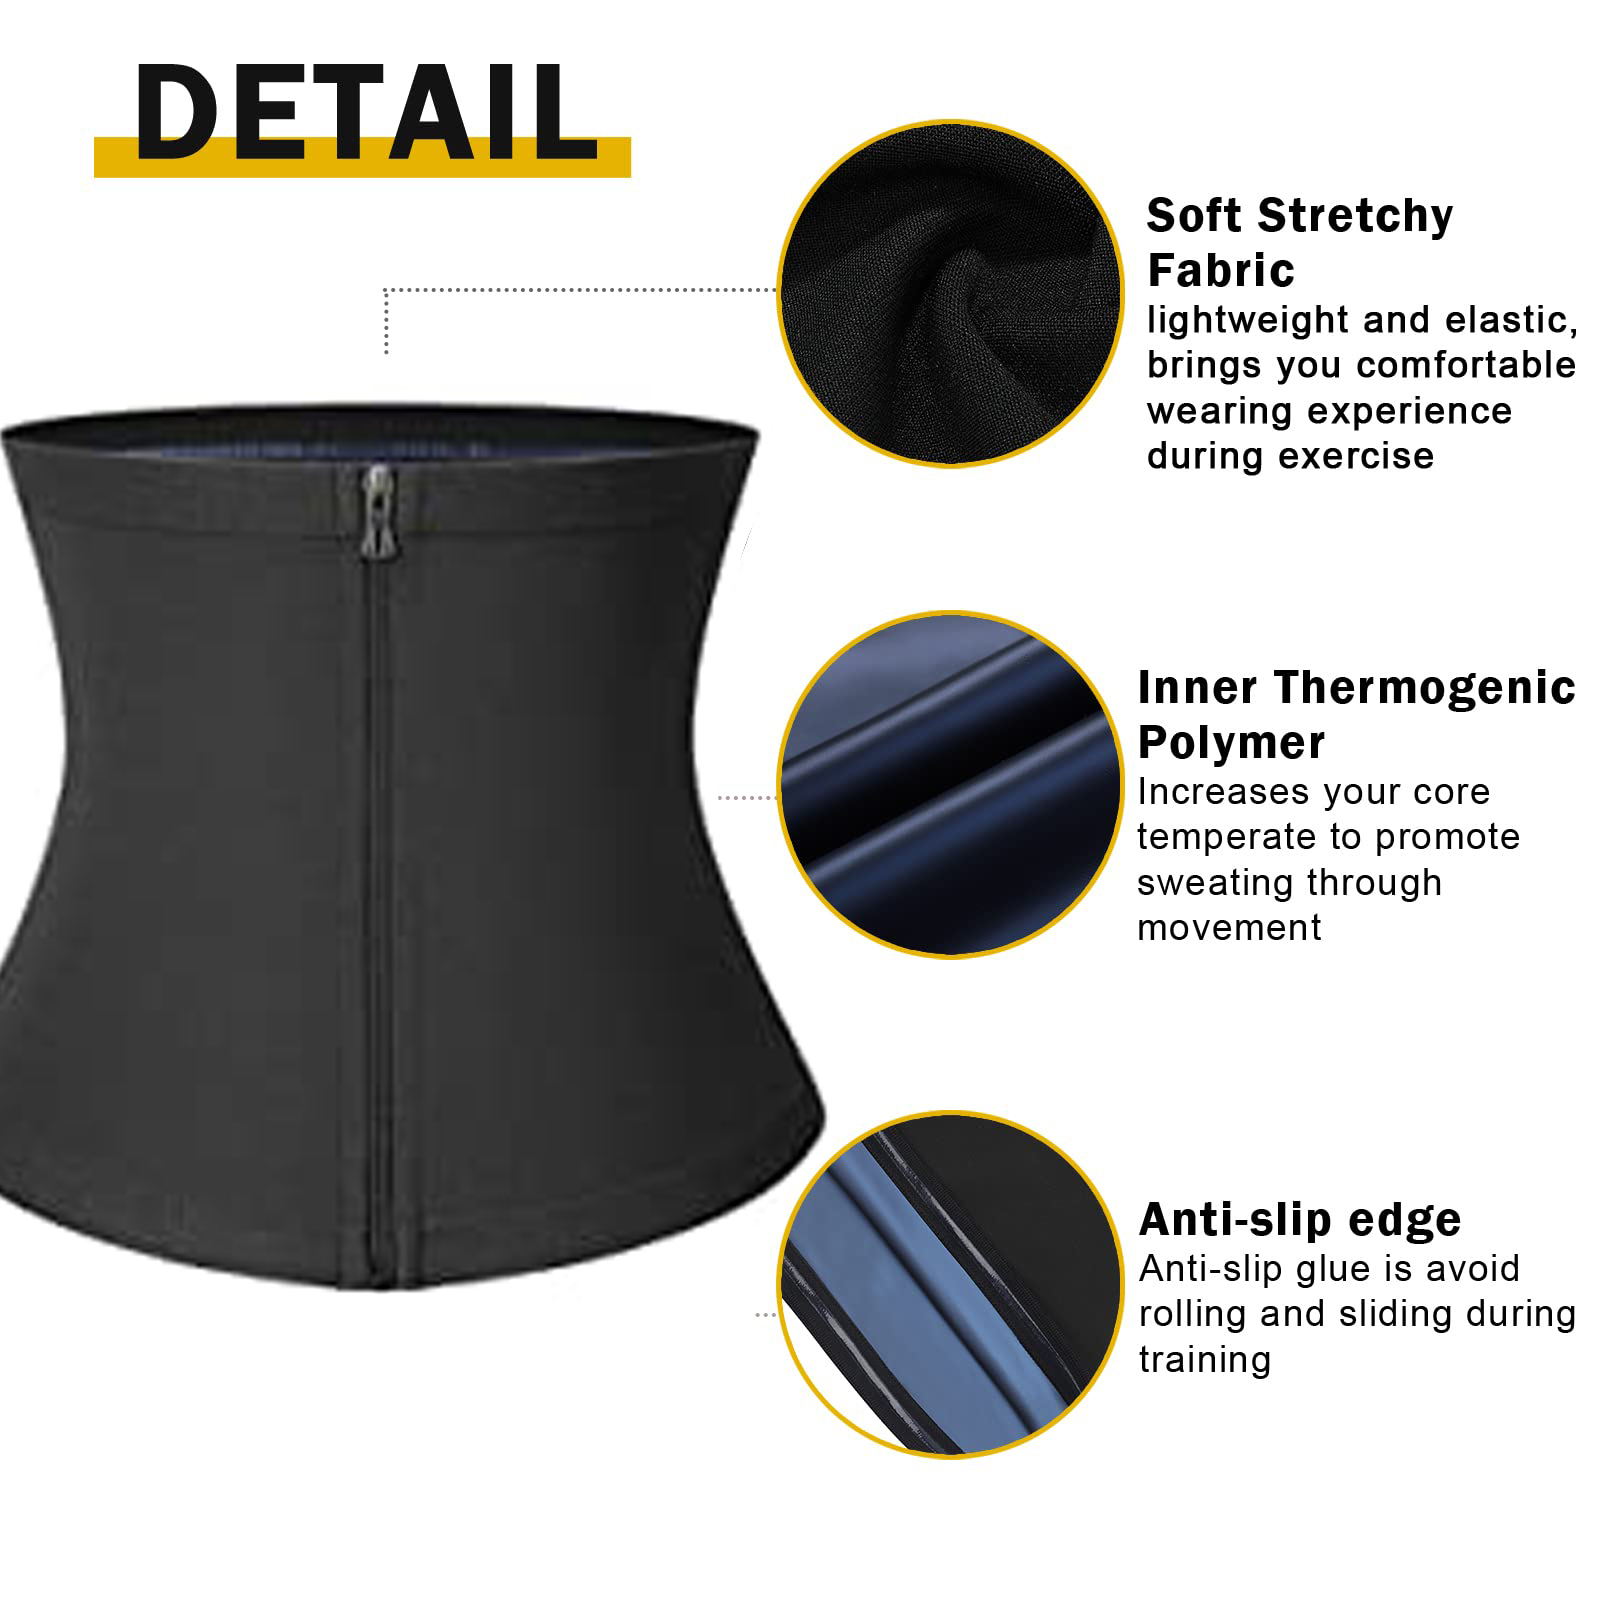 Mens Sweat Belt Use With Sweat Corset For Tummy Control And Fat Burning  From Daidi16, $4.47